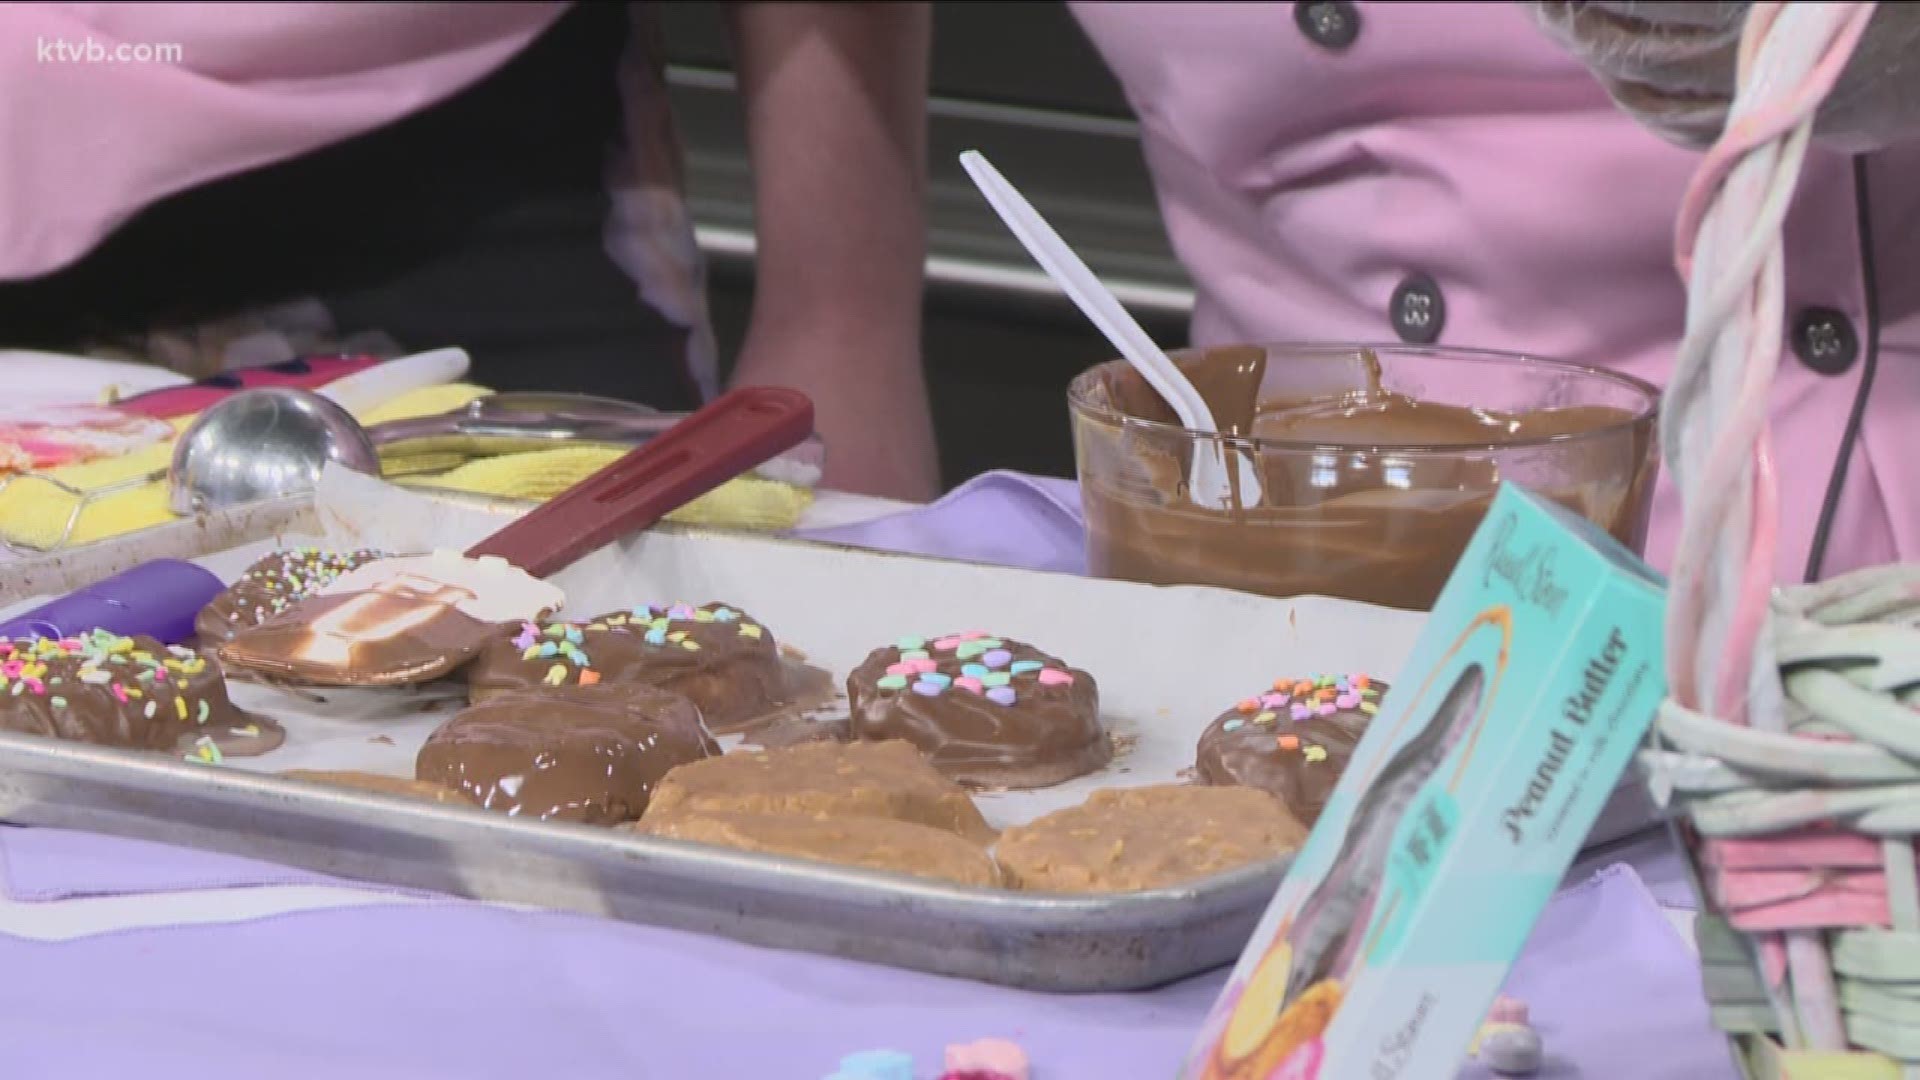 Chef Yvonne stops by the KTVB Kitchen to show us how to make a treat that's sure to please on Easter, or anytime.